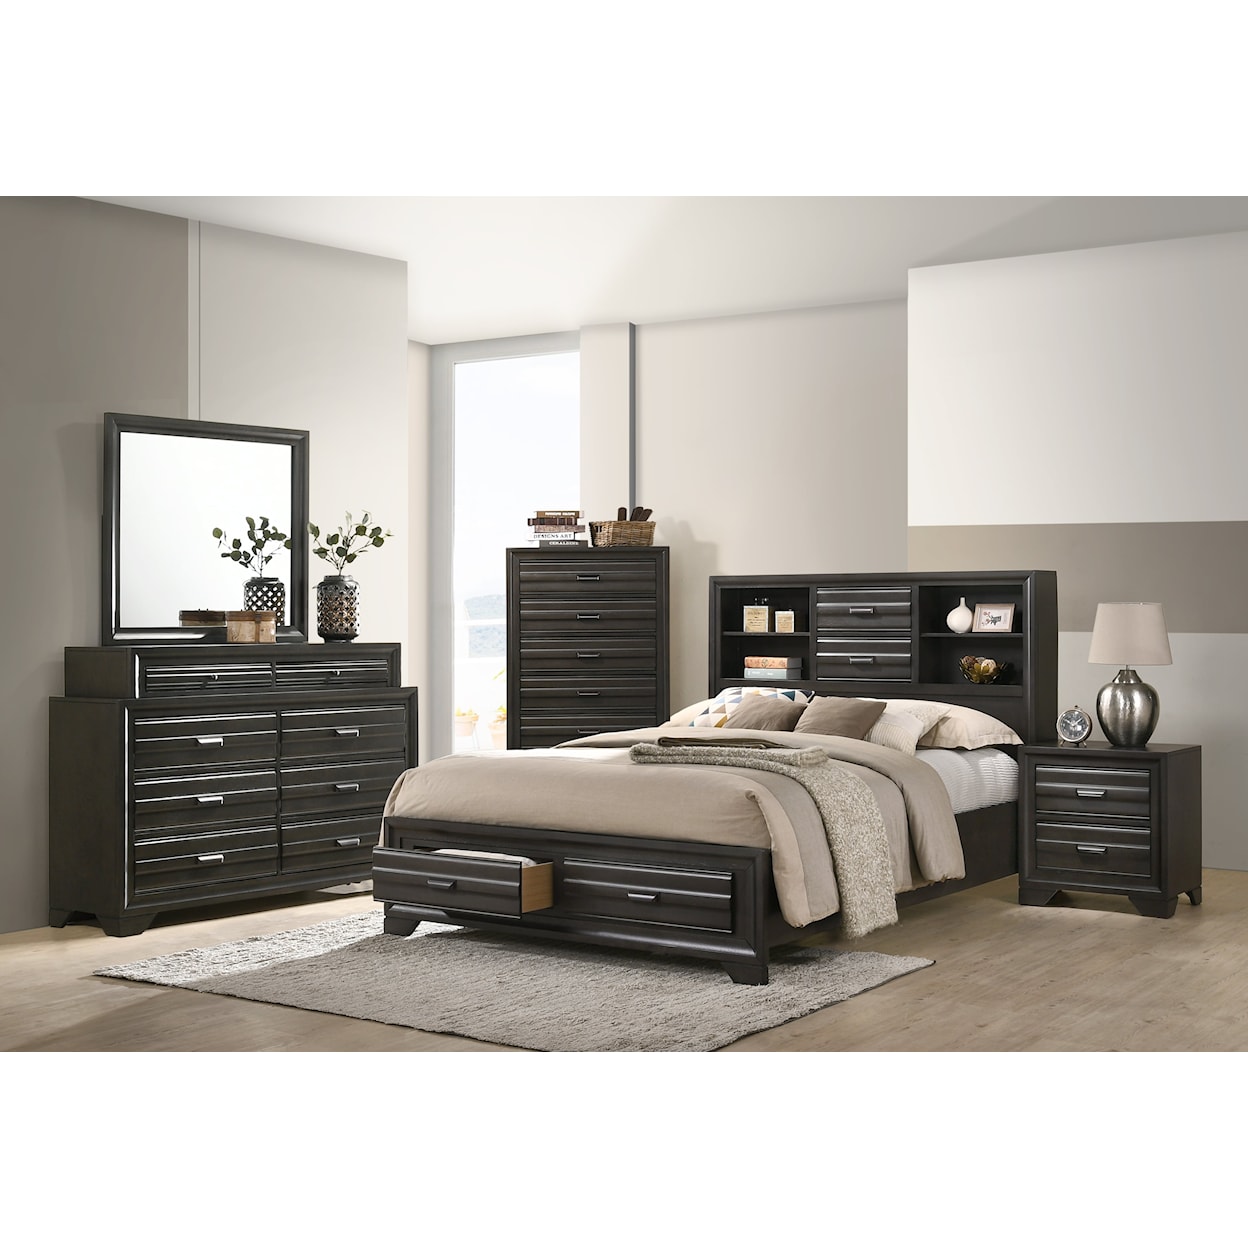 Lifestyle Timmy TIMMY GREY 4 PC QUEEN BEDROOM SET |